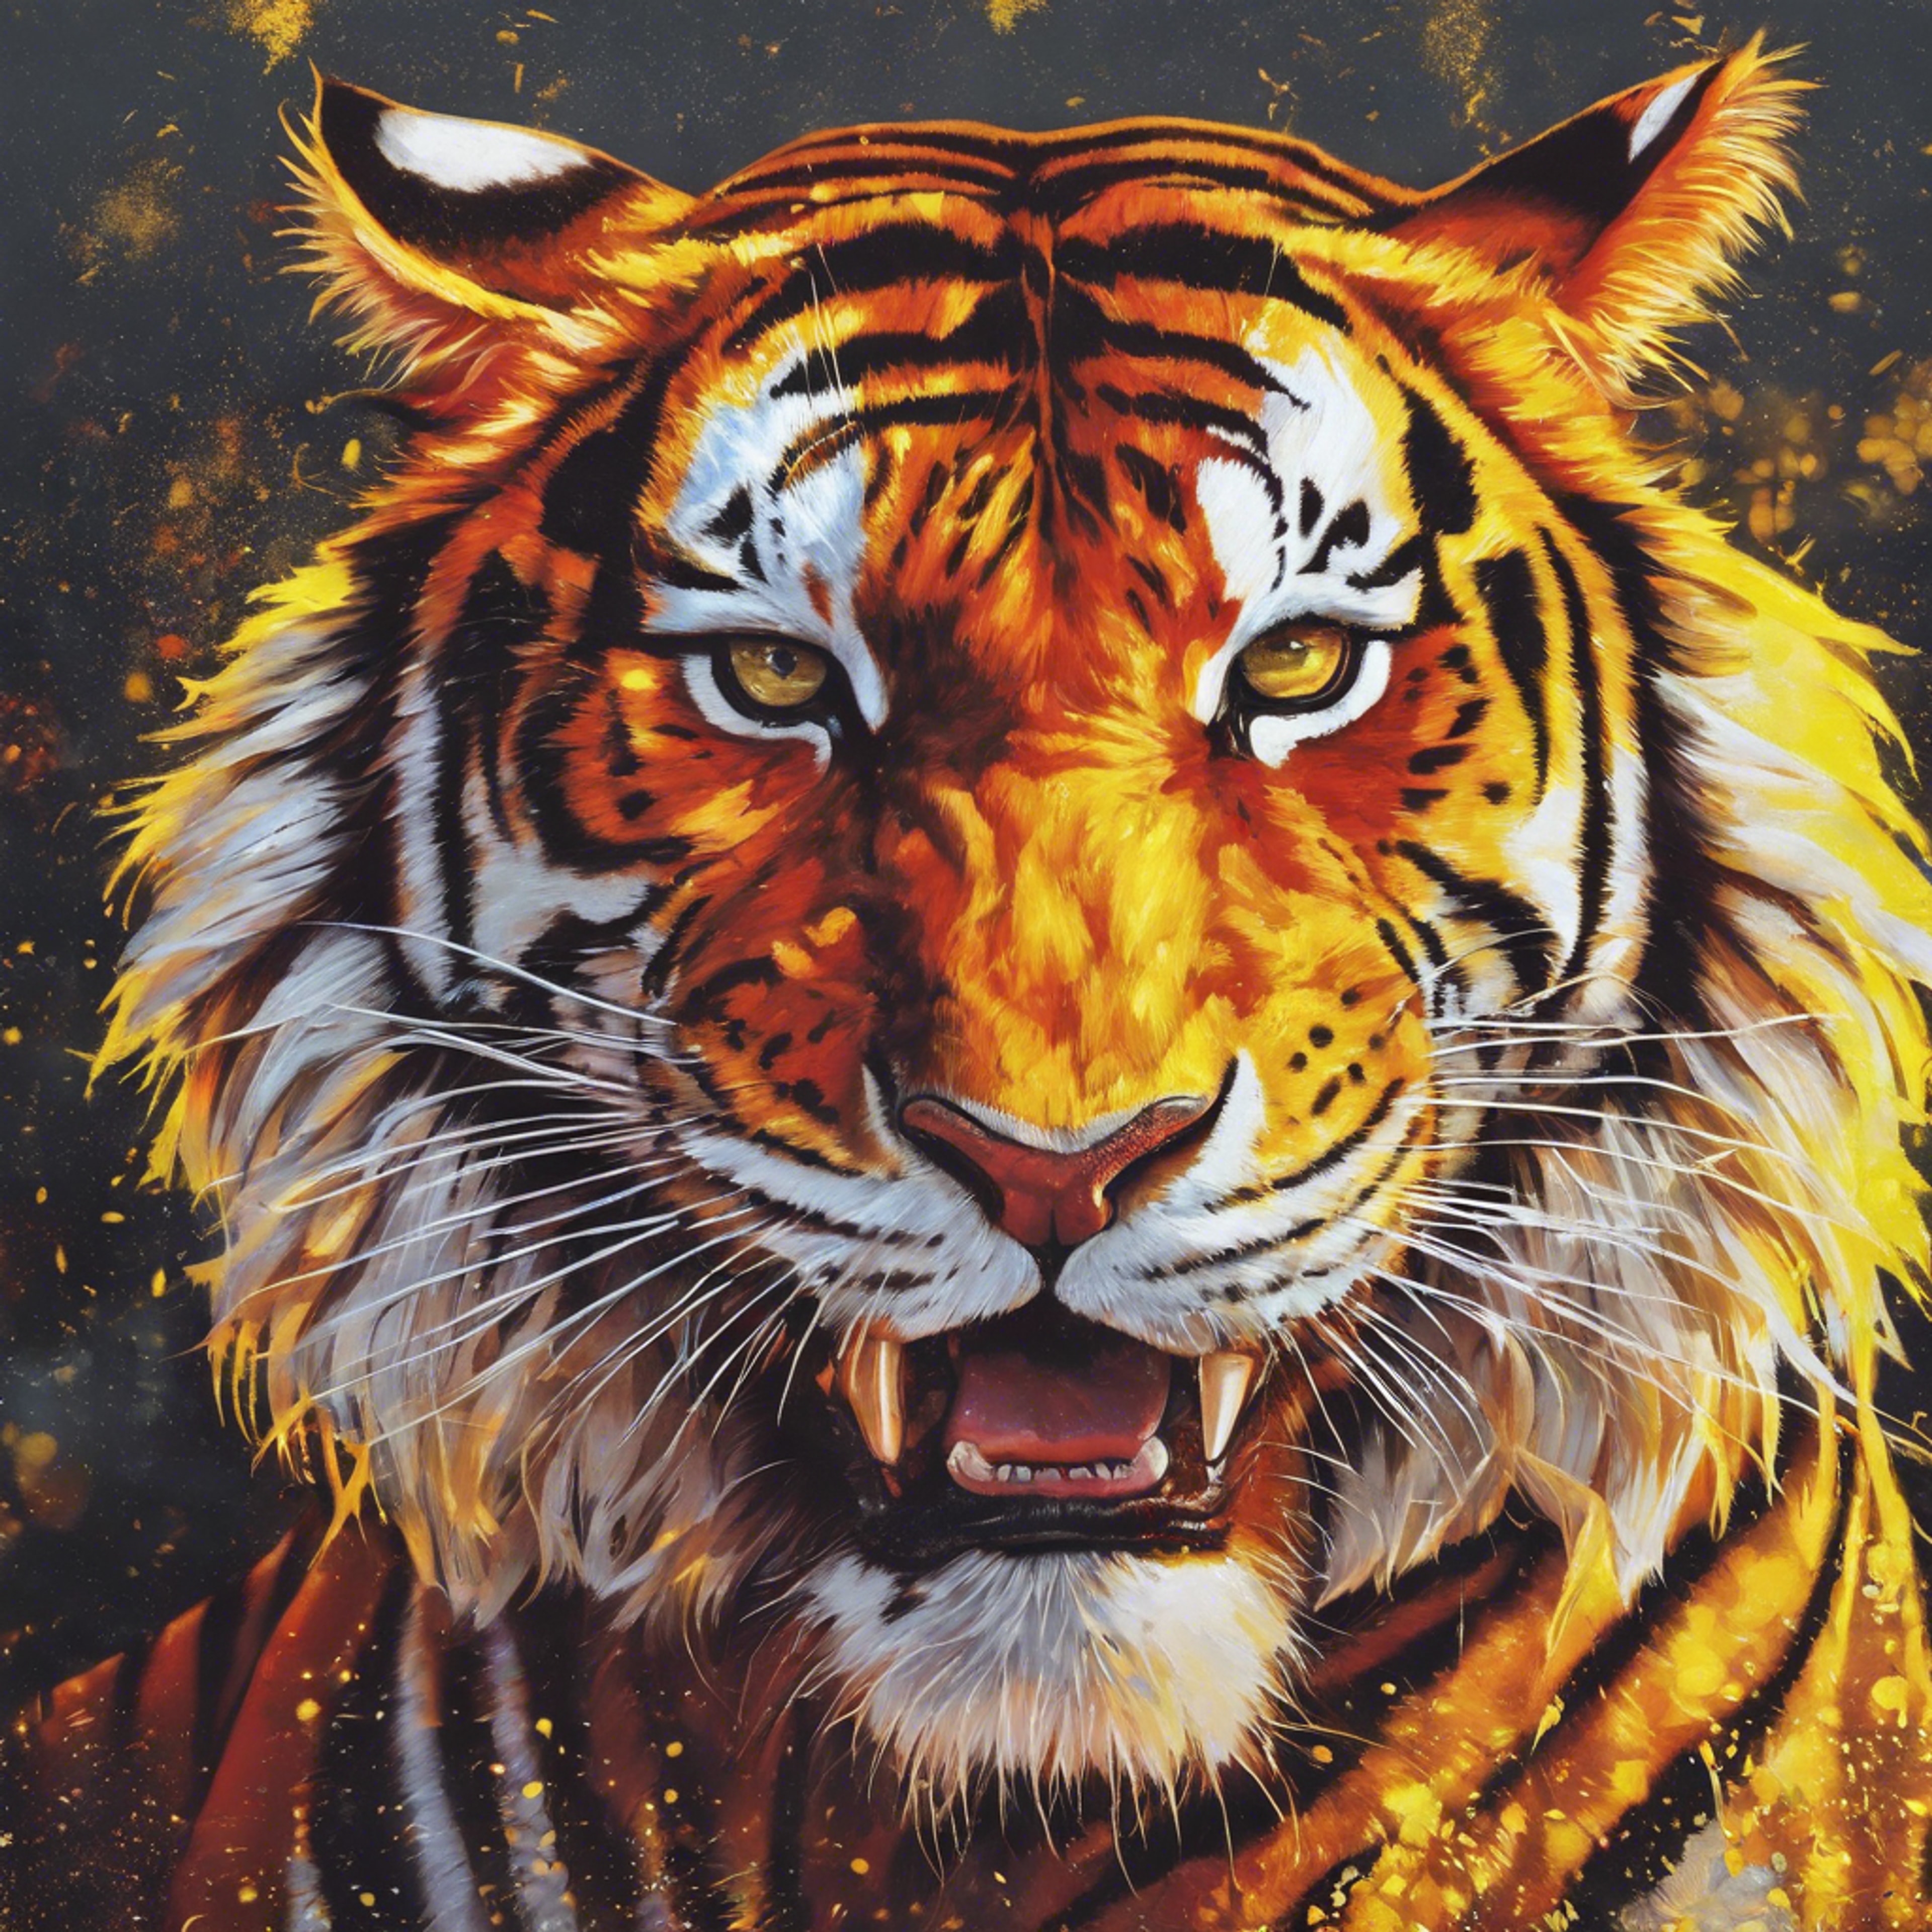 A mural featuring a cool red tiger roaring, under a bright yellow sun, symbolizing strength and energy. Wallpaper[b92d4e06da1a4dd6b9b7]